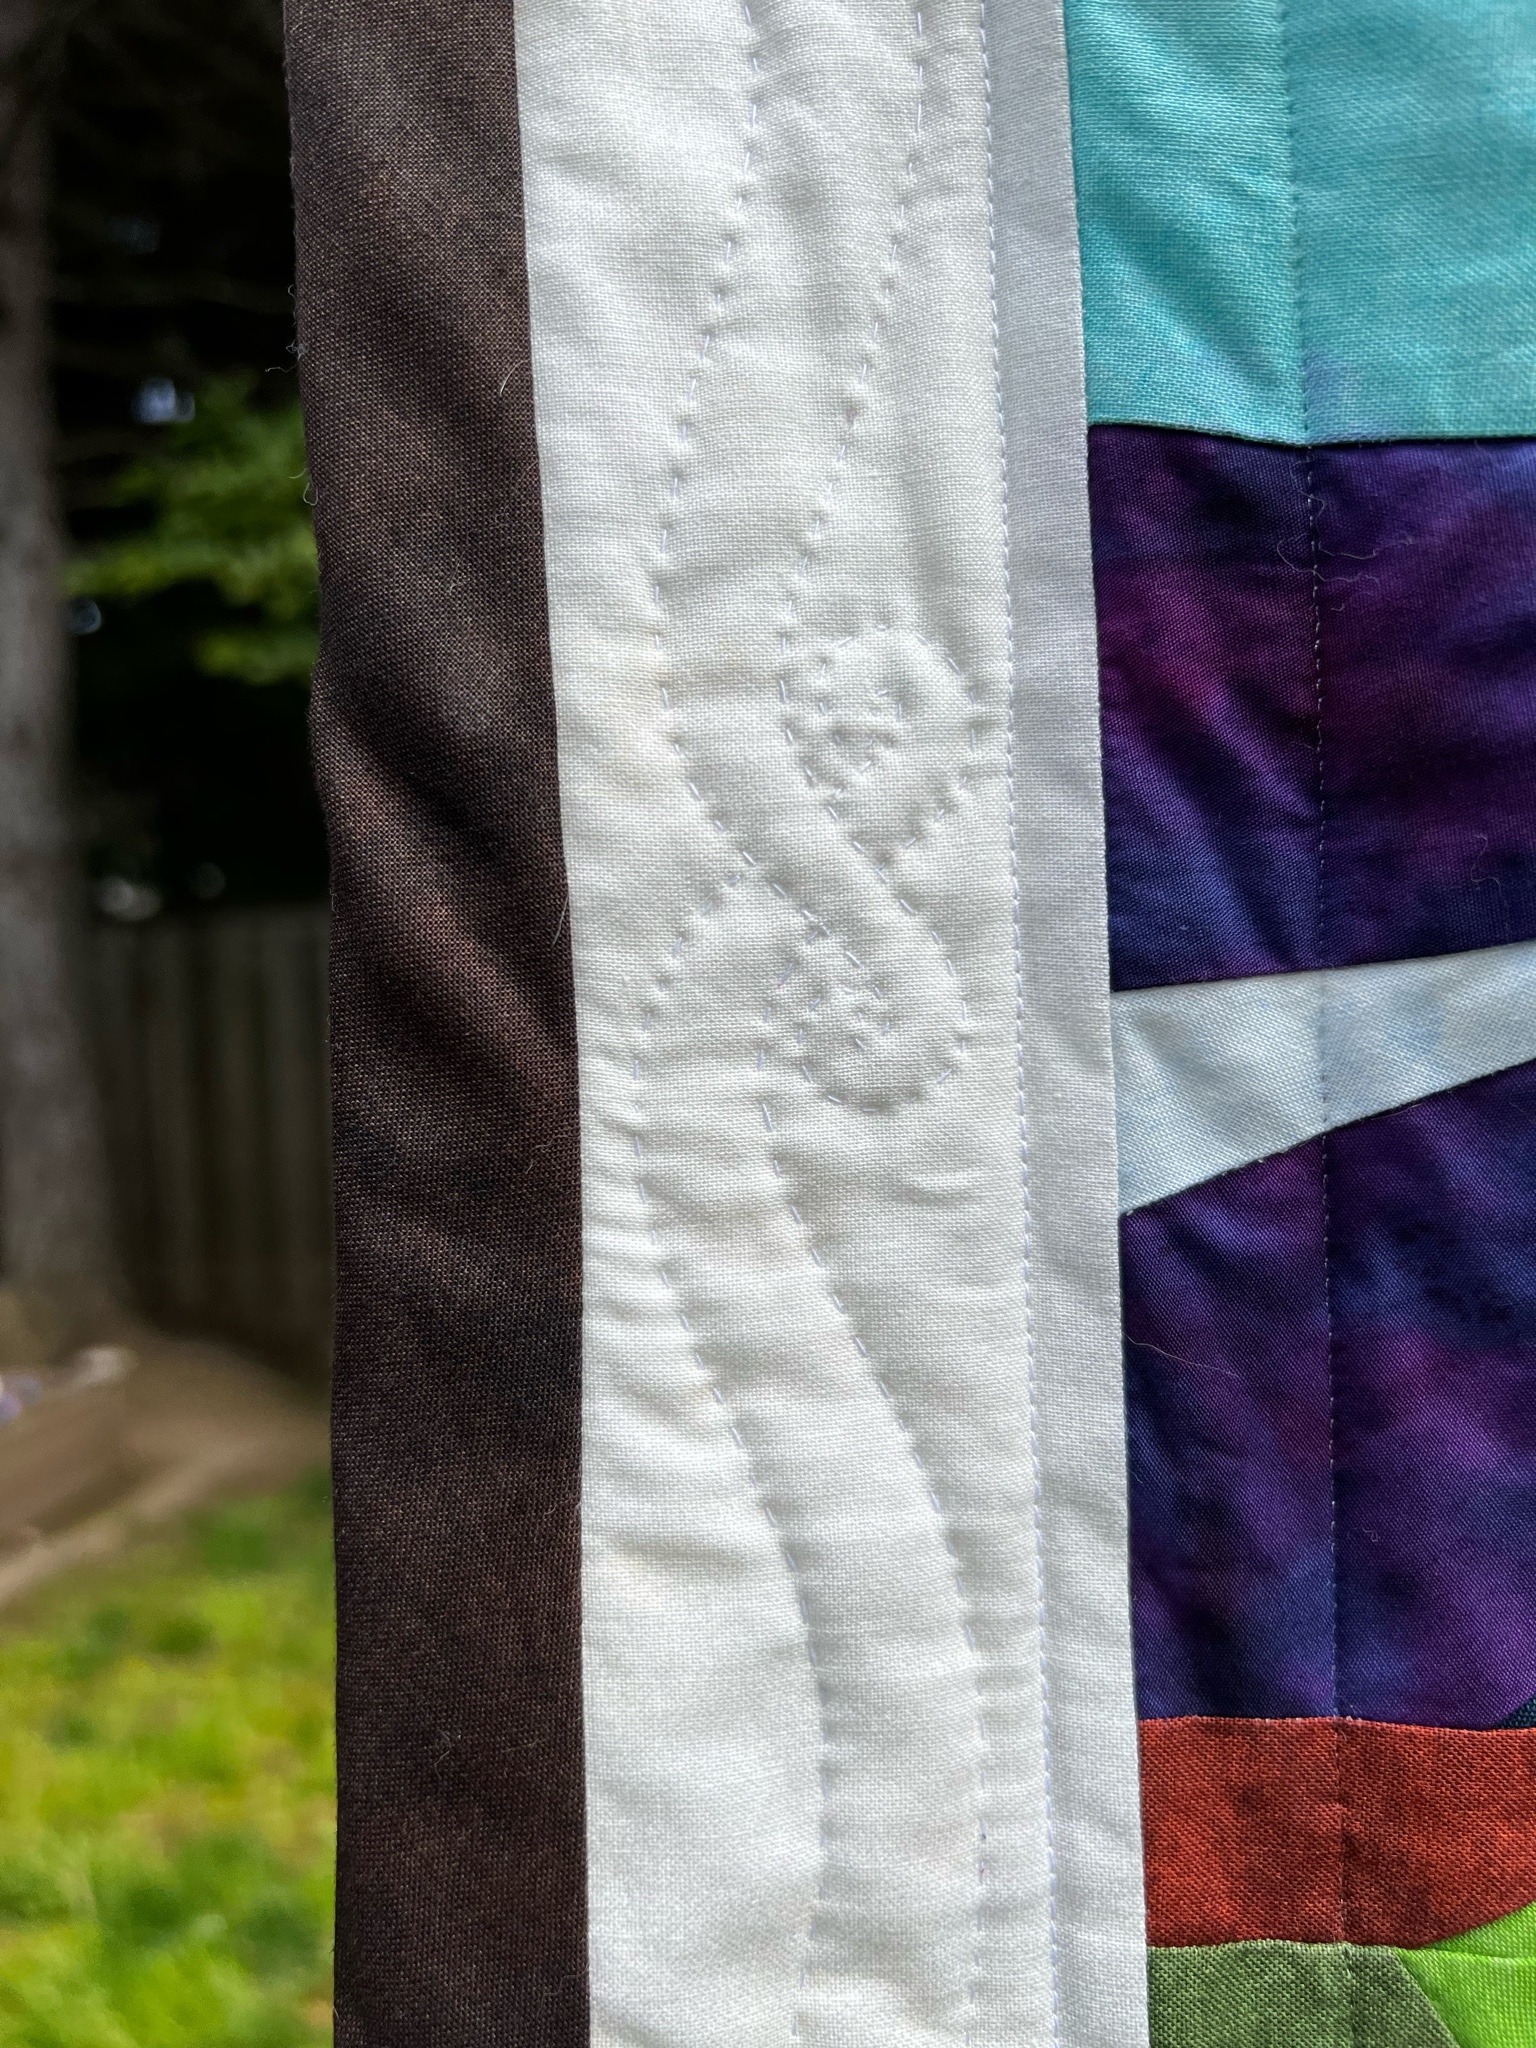 detail of the above quilt side border, white stitching on white fabric in a pattern depicting tentacles curled over each other